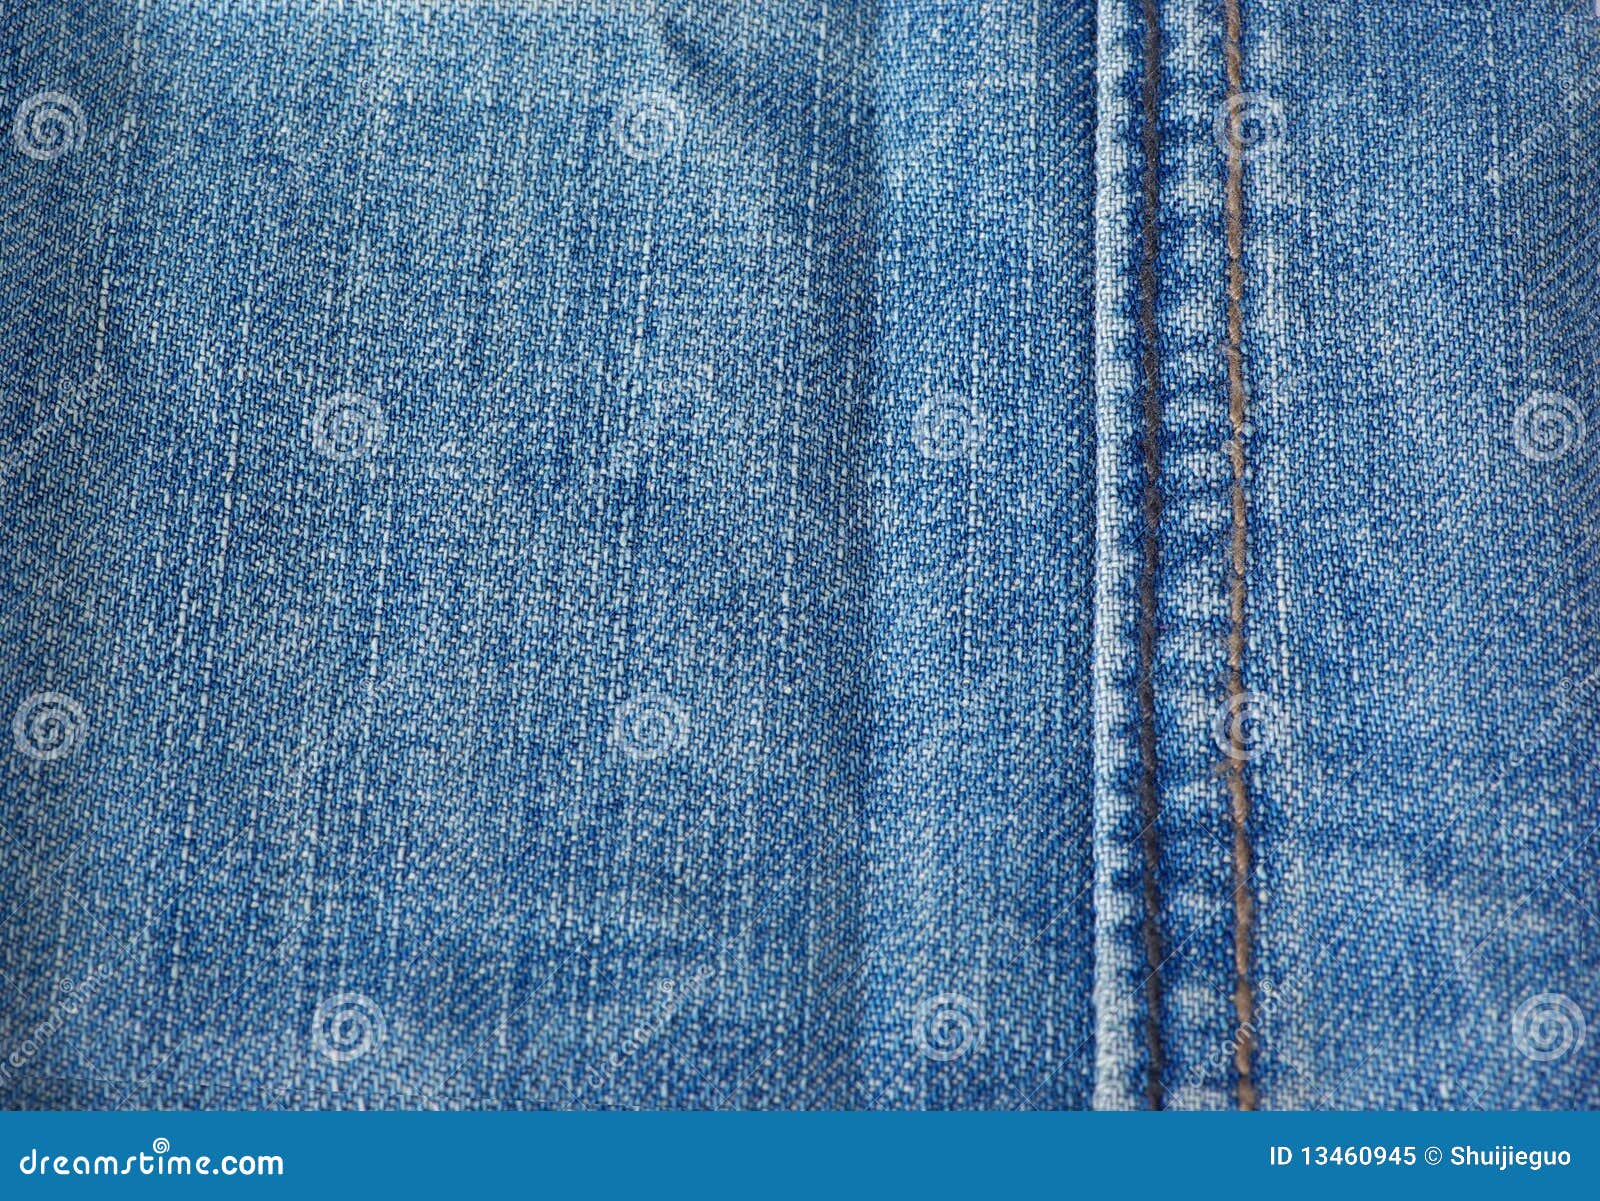 Jeans stock image. Image of textile, fabric, texture - 13460945